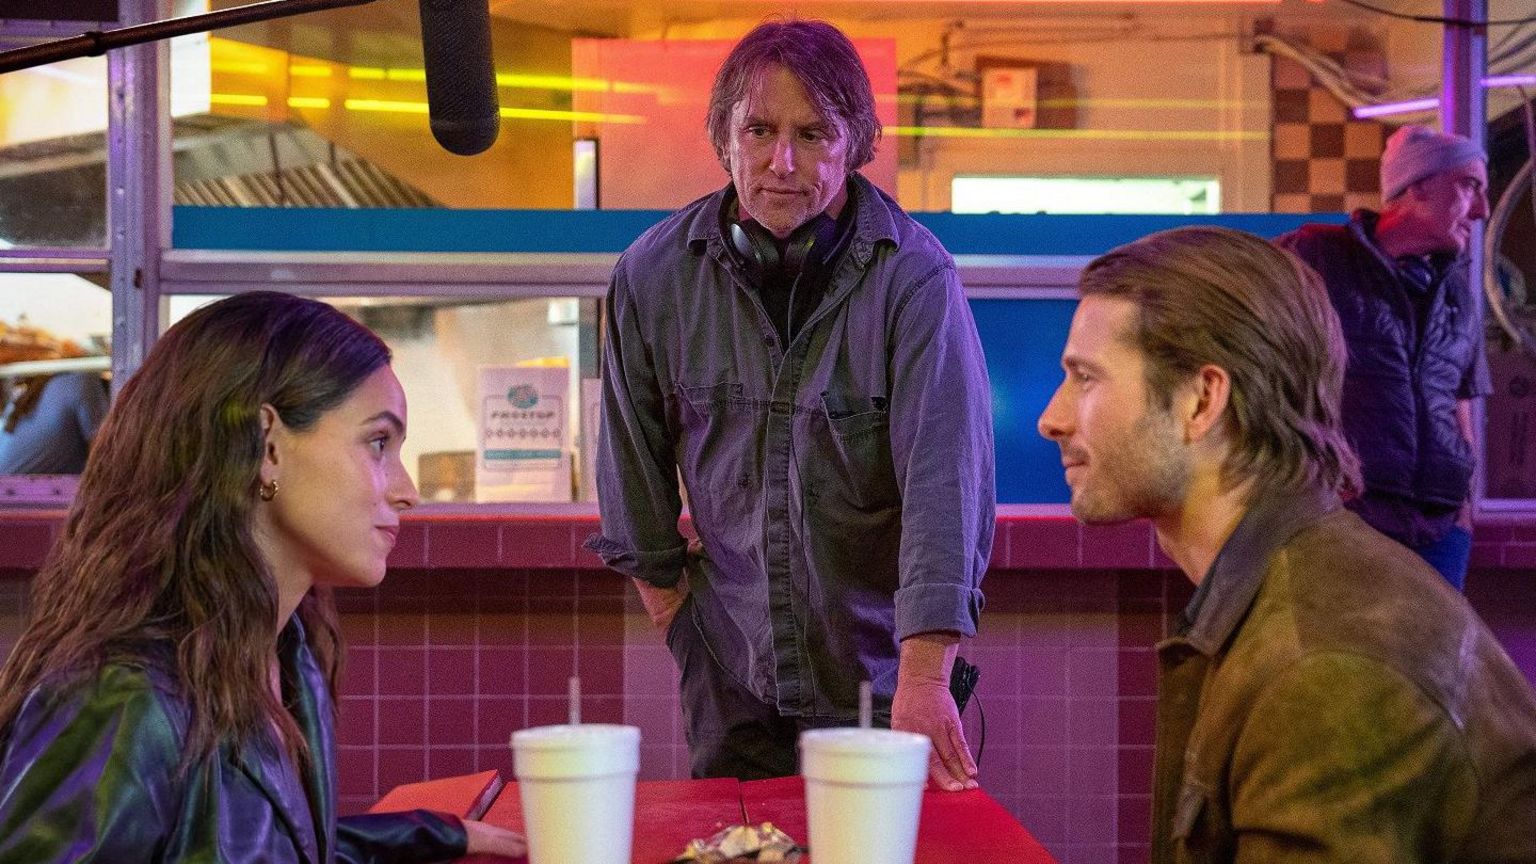 Director Richard Linklater watching Adria Arjona and Glen Powell filming a scene playfully looking at each other across a bench at a diner